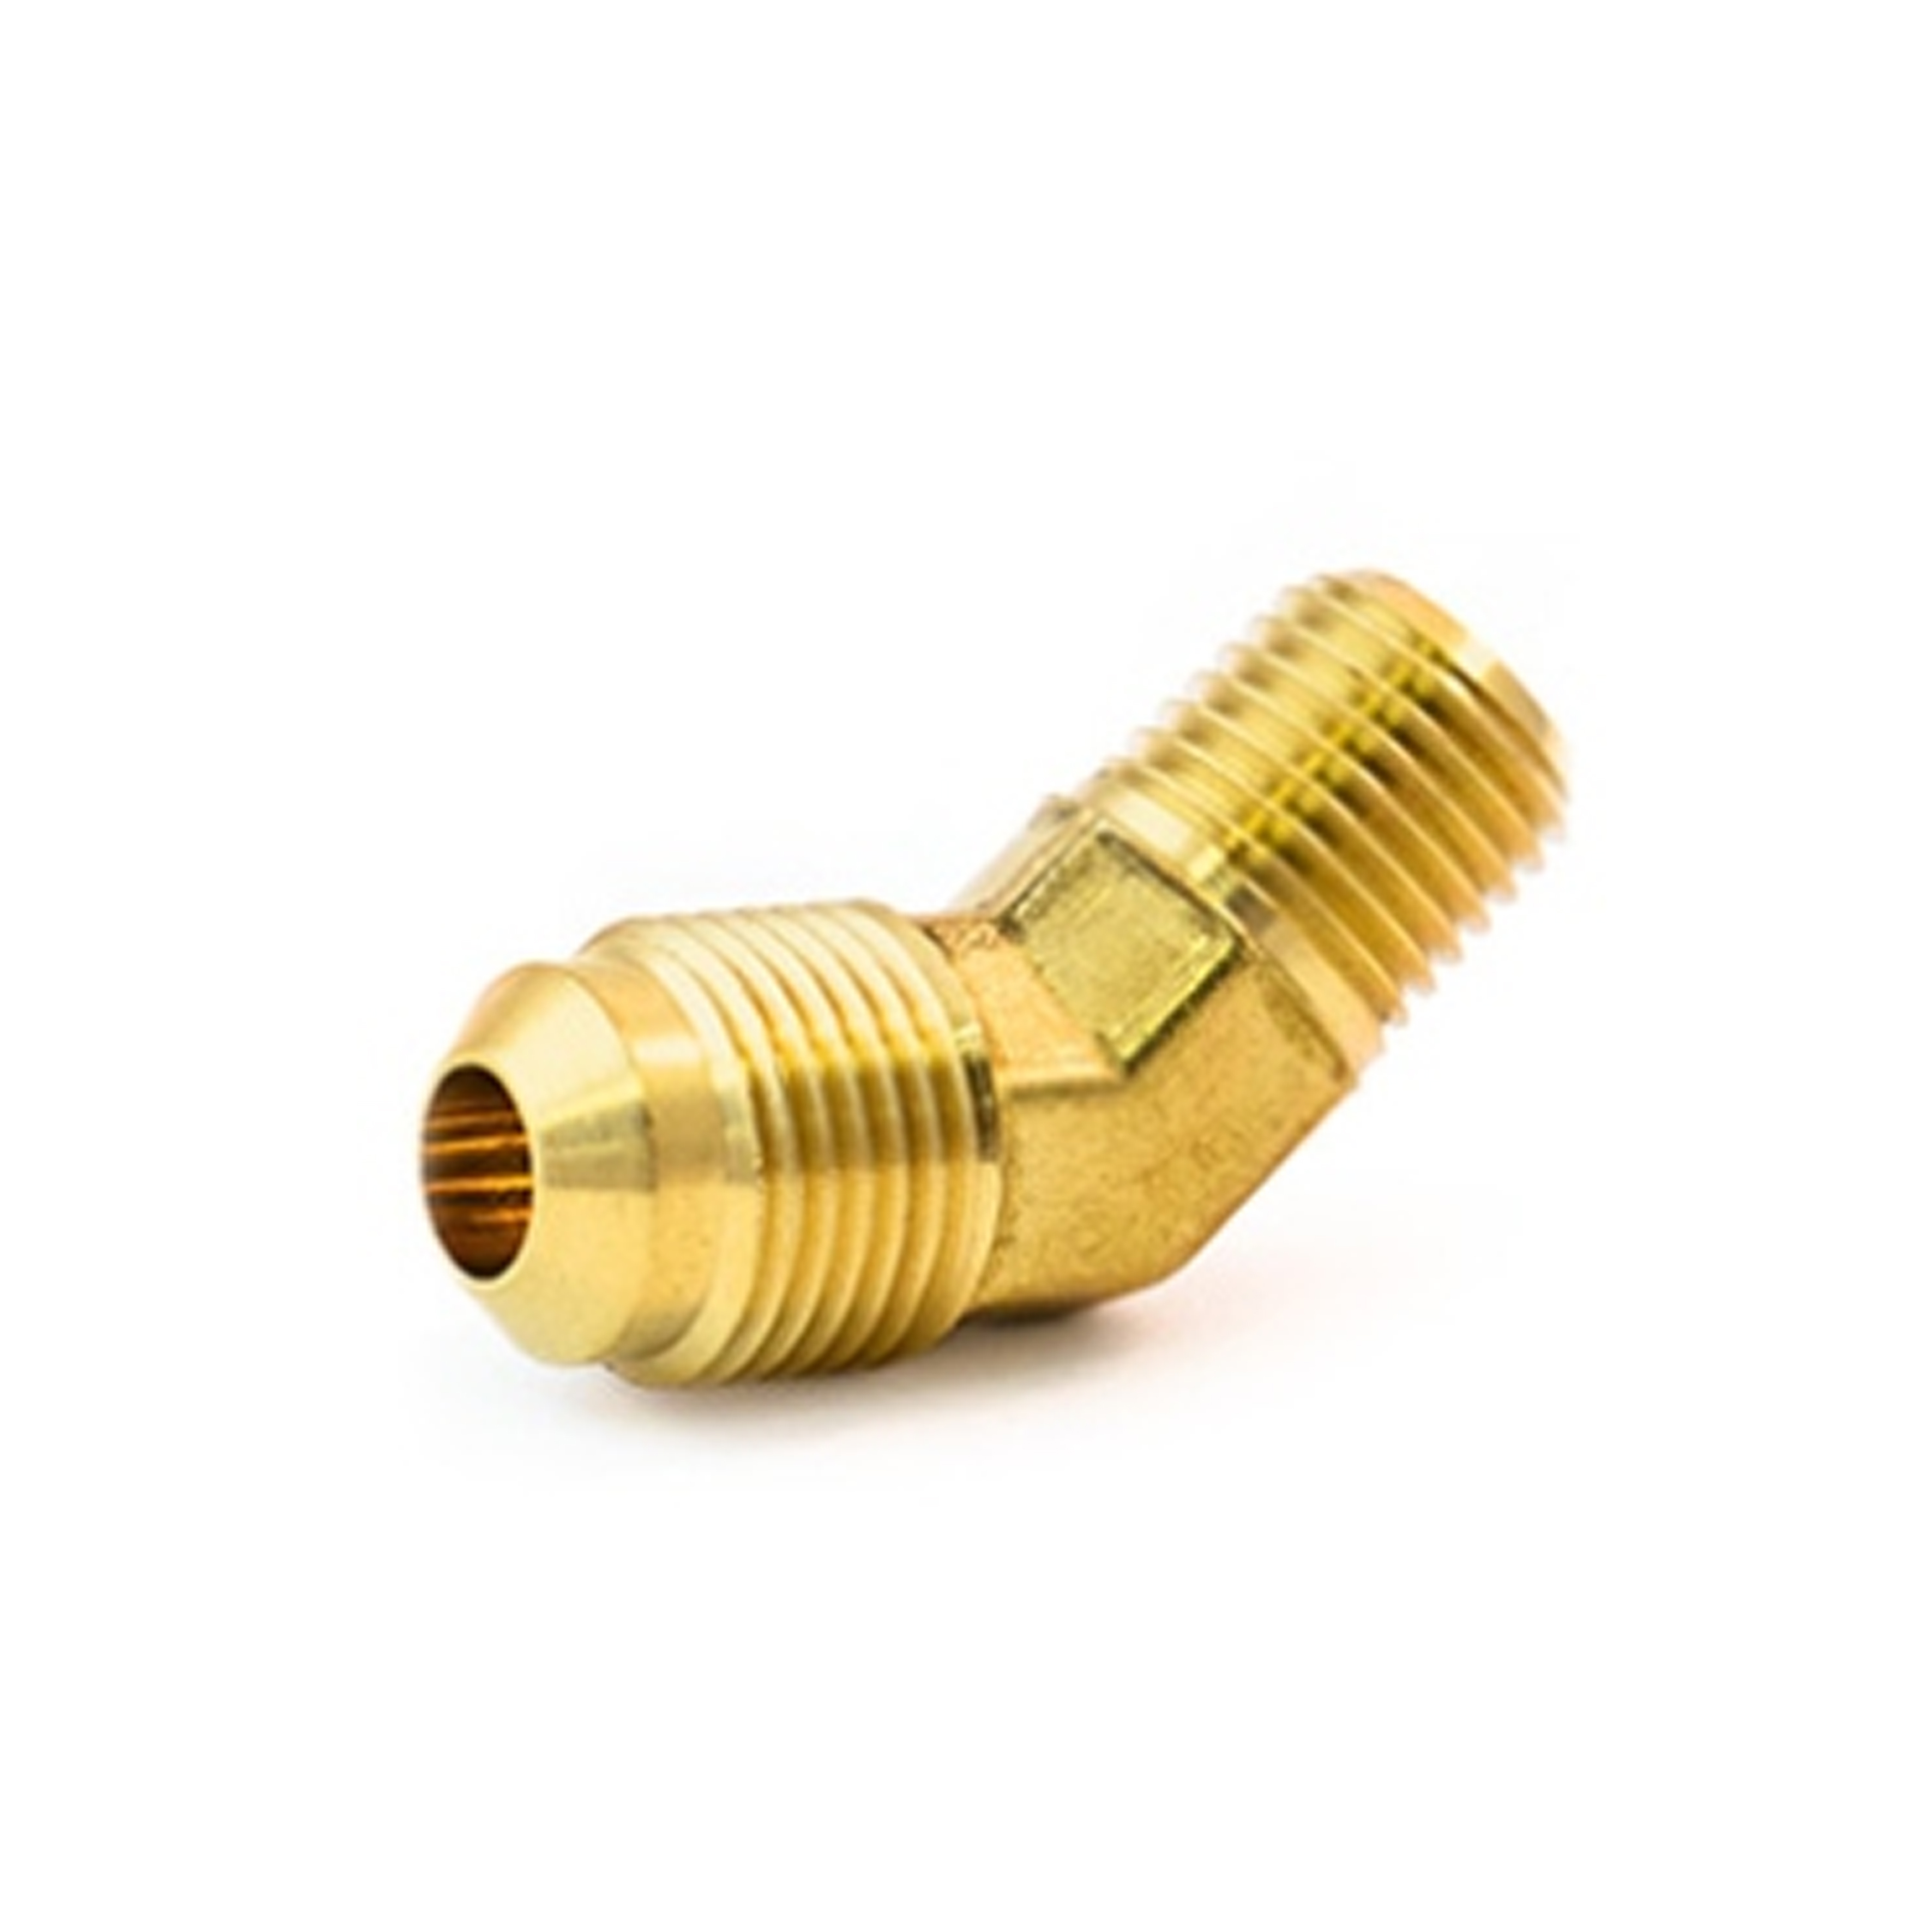 F54	Male Pipe 45° Elbow SAE J512 #010302 SAE 45°flare Fittings Adapter Connector E145 54 159F 654F 59FF 254 47 4945